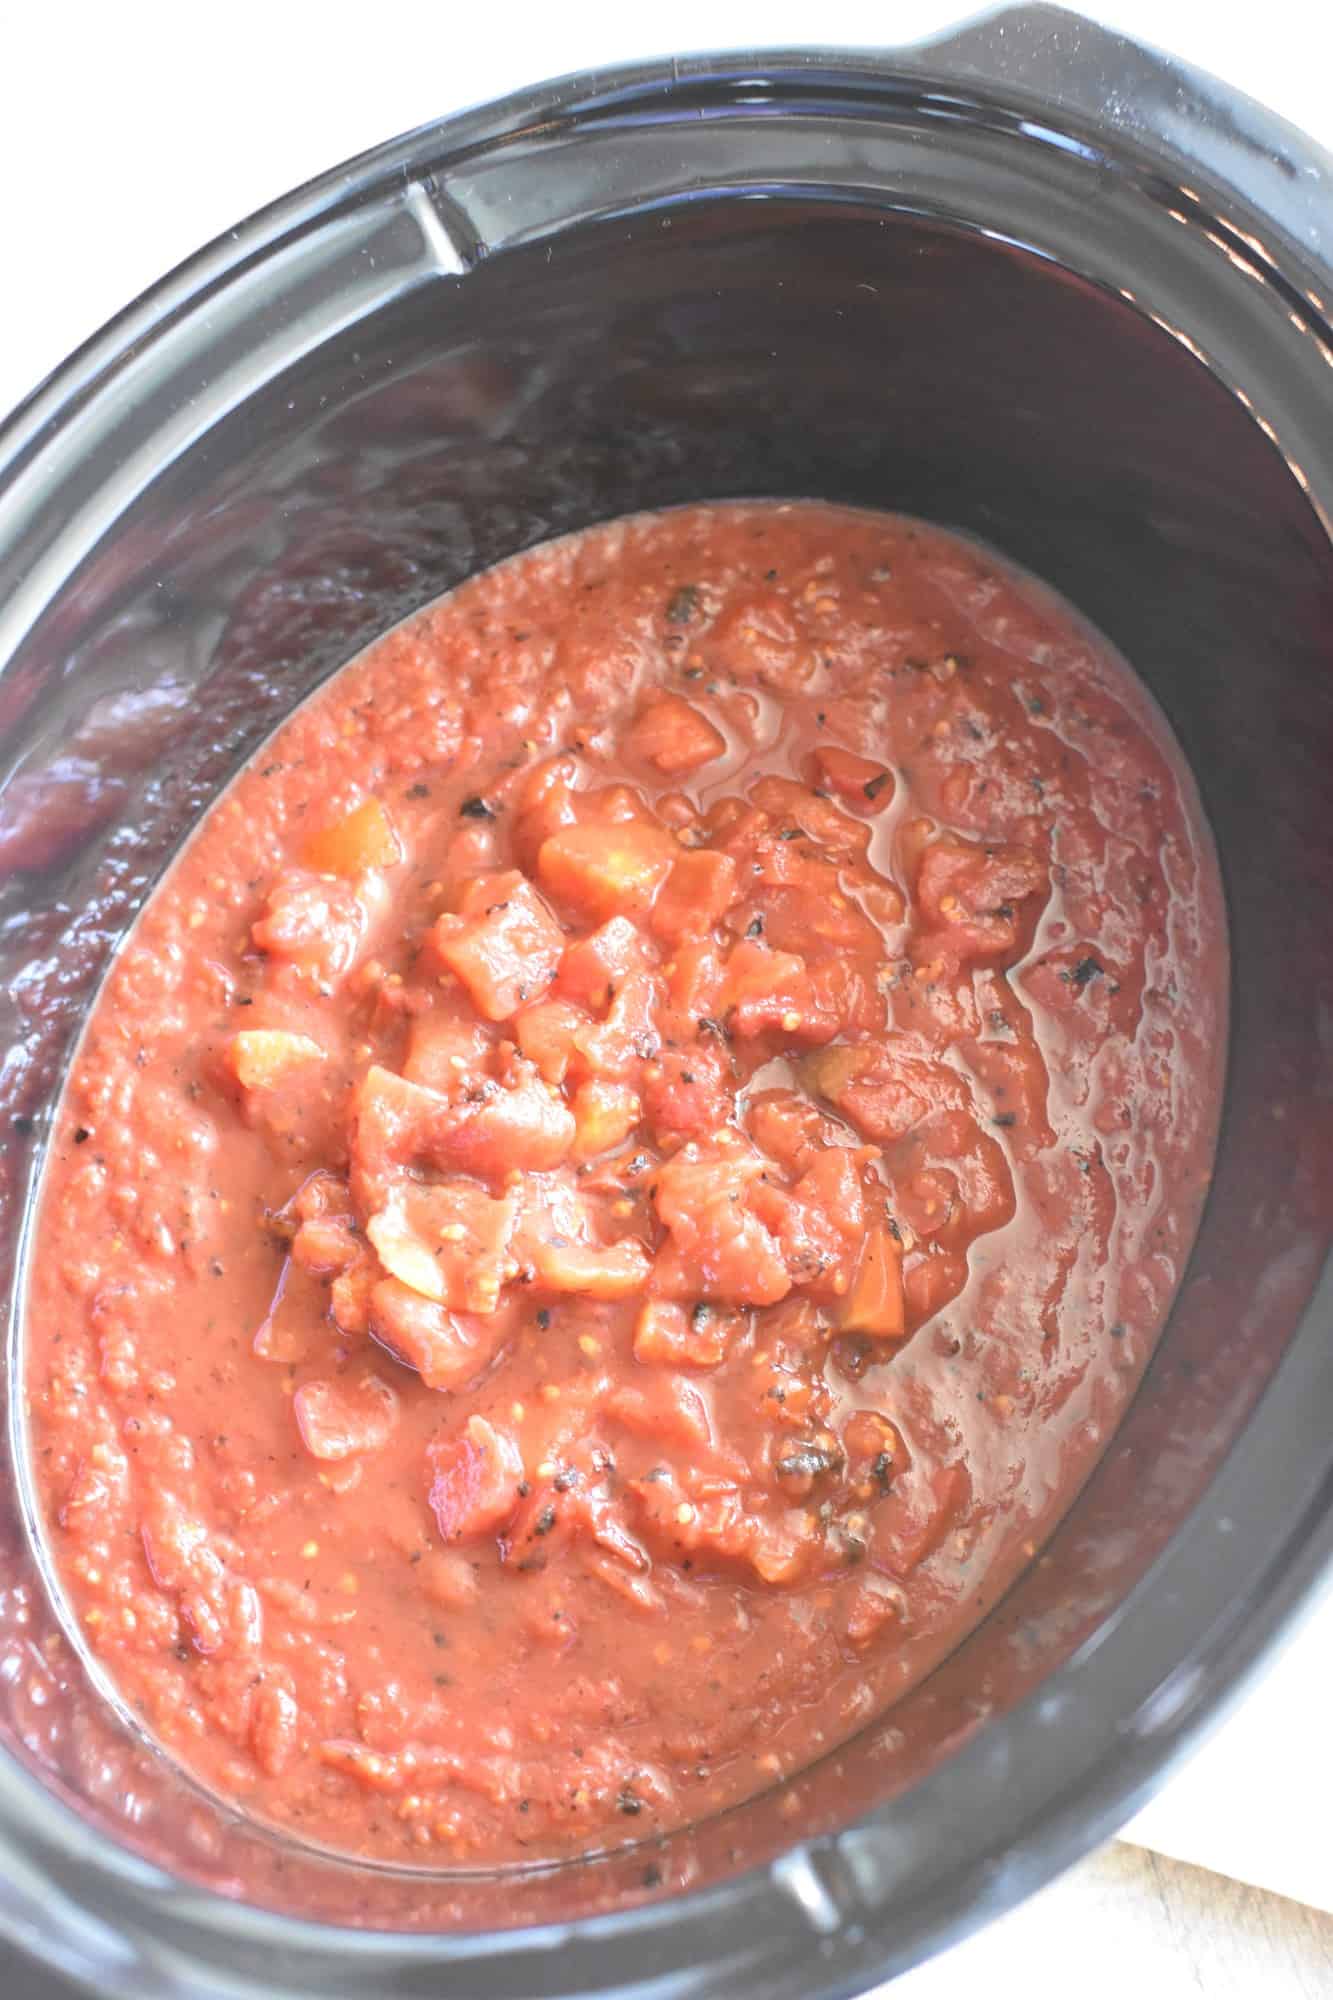 tomatoes, maple syrup, lime juice and vegetable broth added to slow cooker